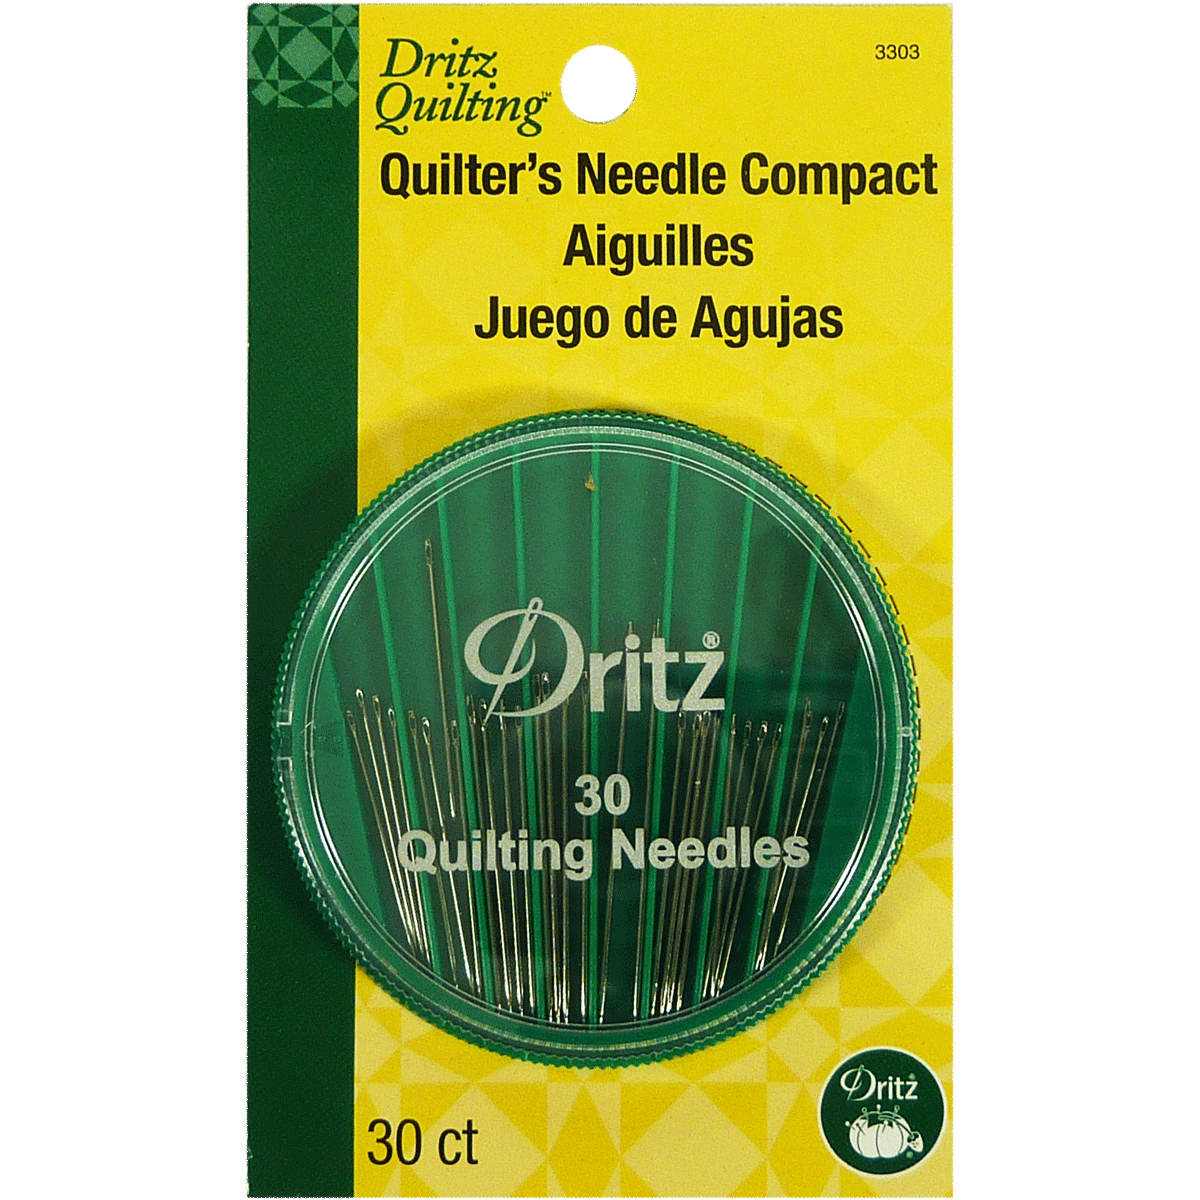 Quilter's Needle Compact - 30 pkg - Dritz Quilting